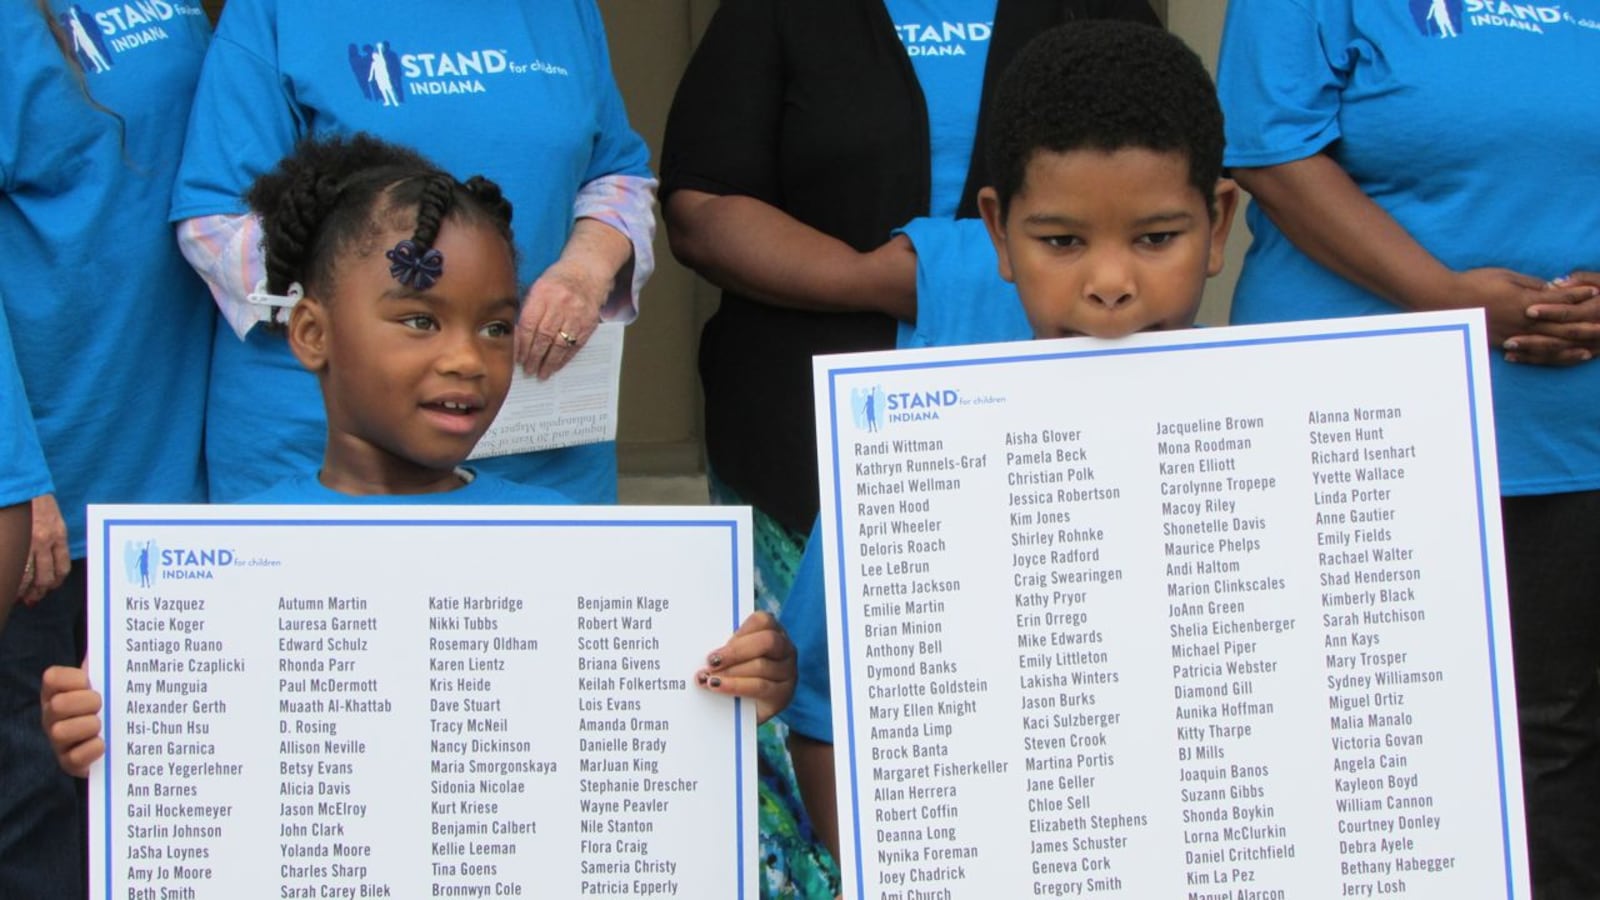 Kids hold up the names of parents who signed Stand For Children petitions supporting changes in IPS at today's press conference.